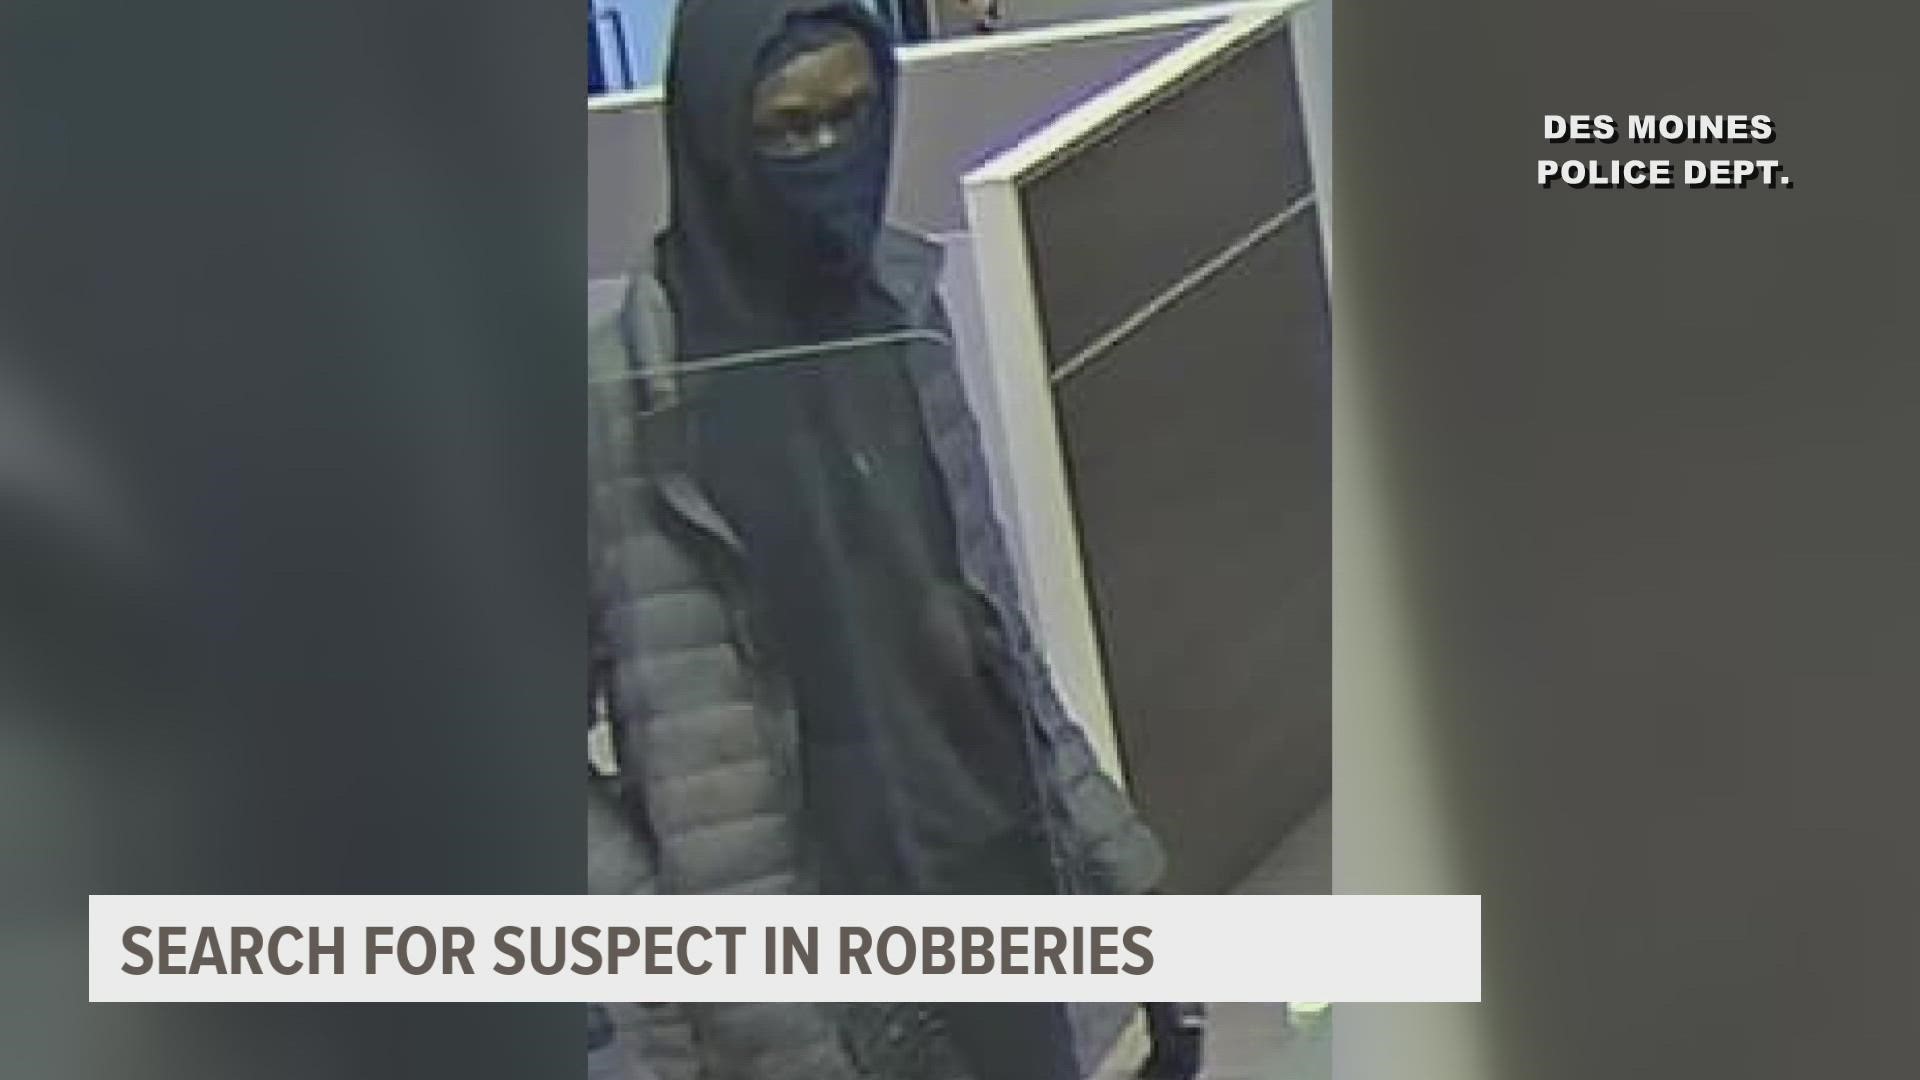 Police say the suspect was seen on surveillance cameras robbing two different banks.